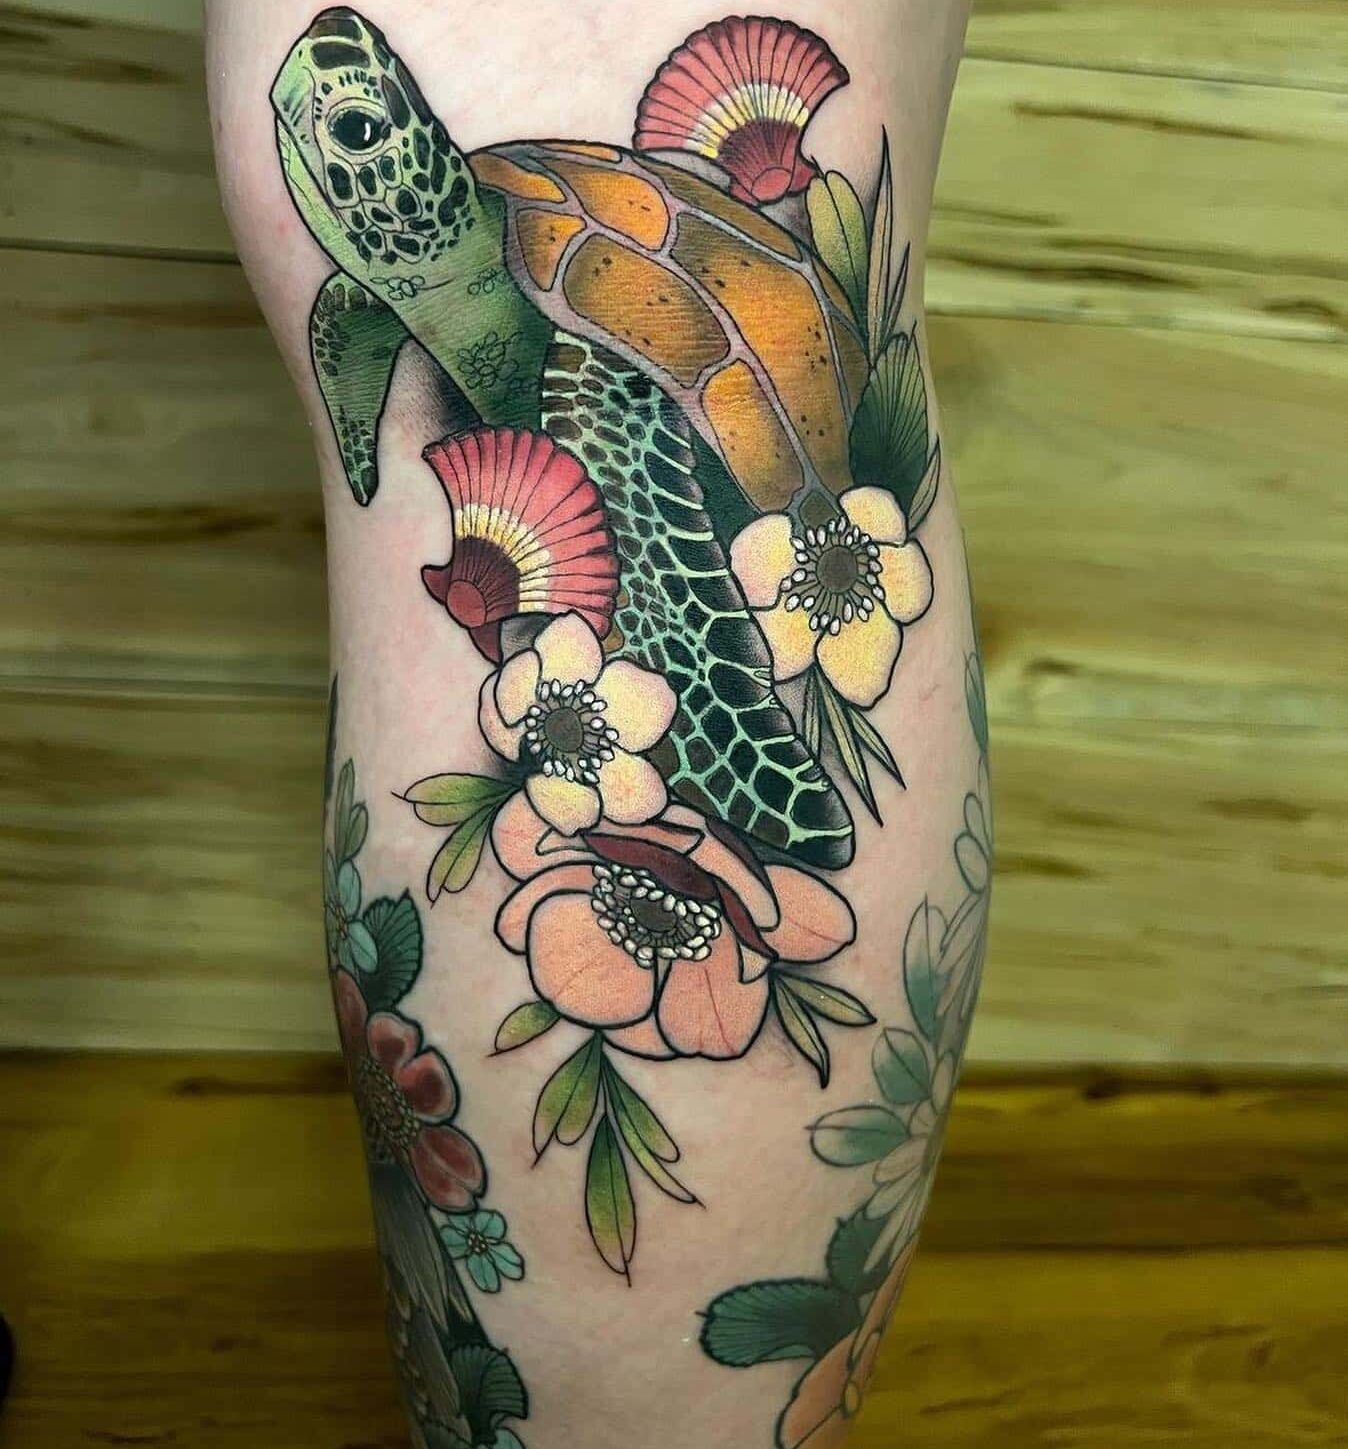 Watercolor style turtle and flowers tattoo on the calf